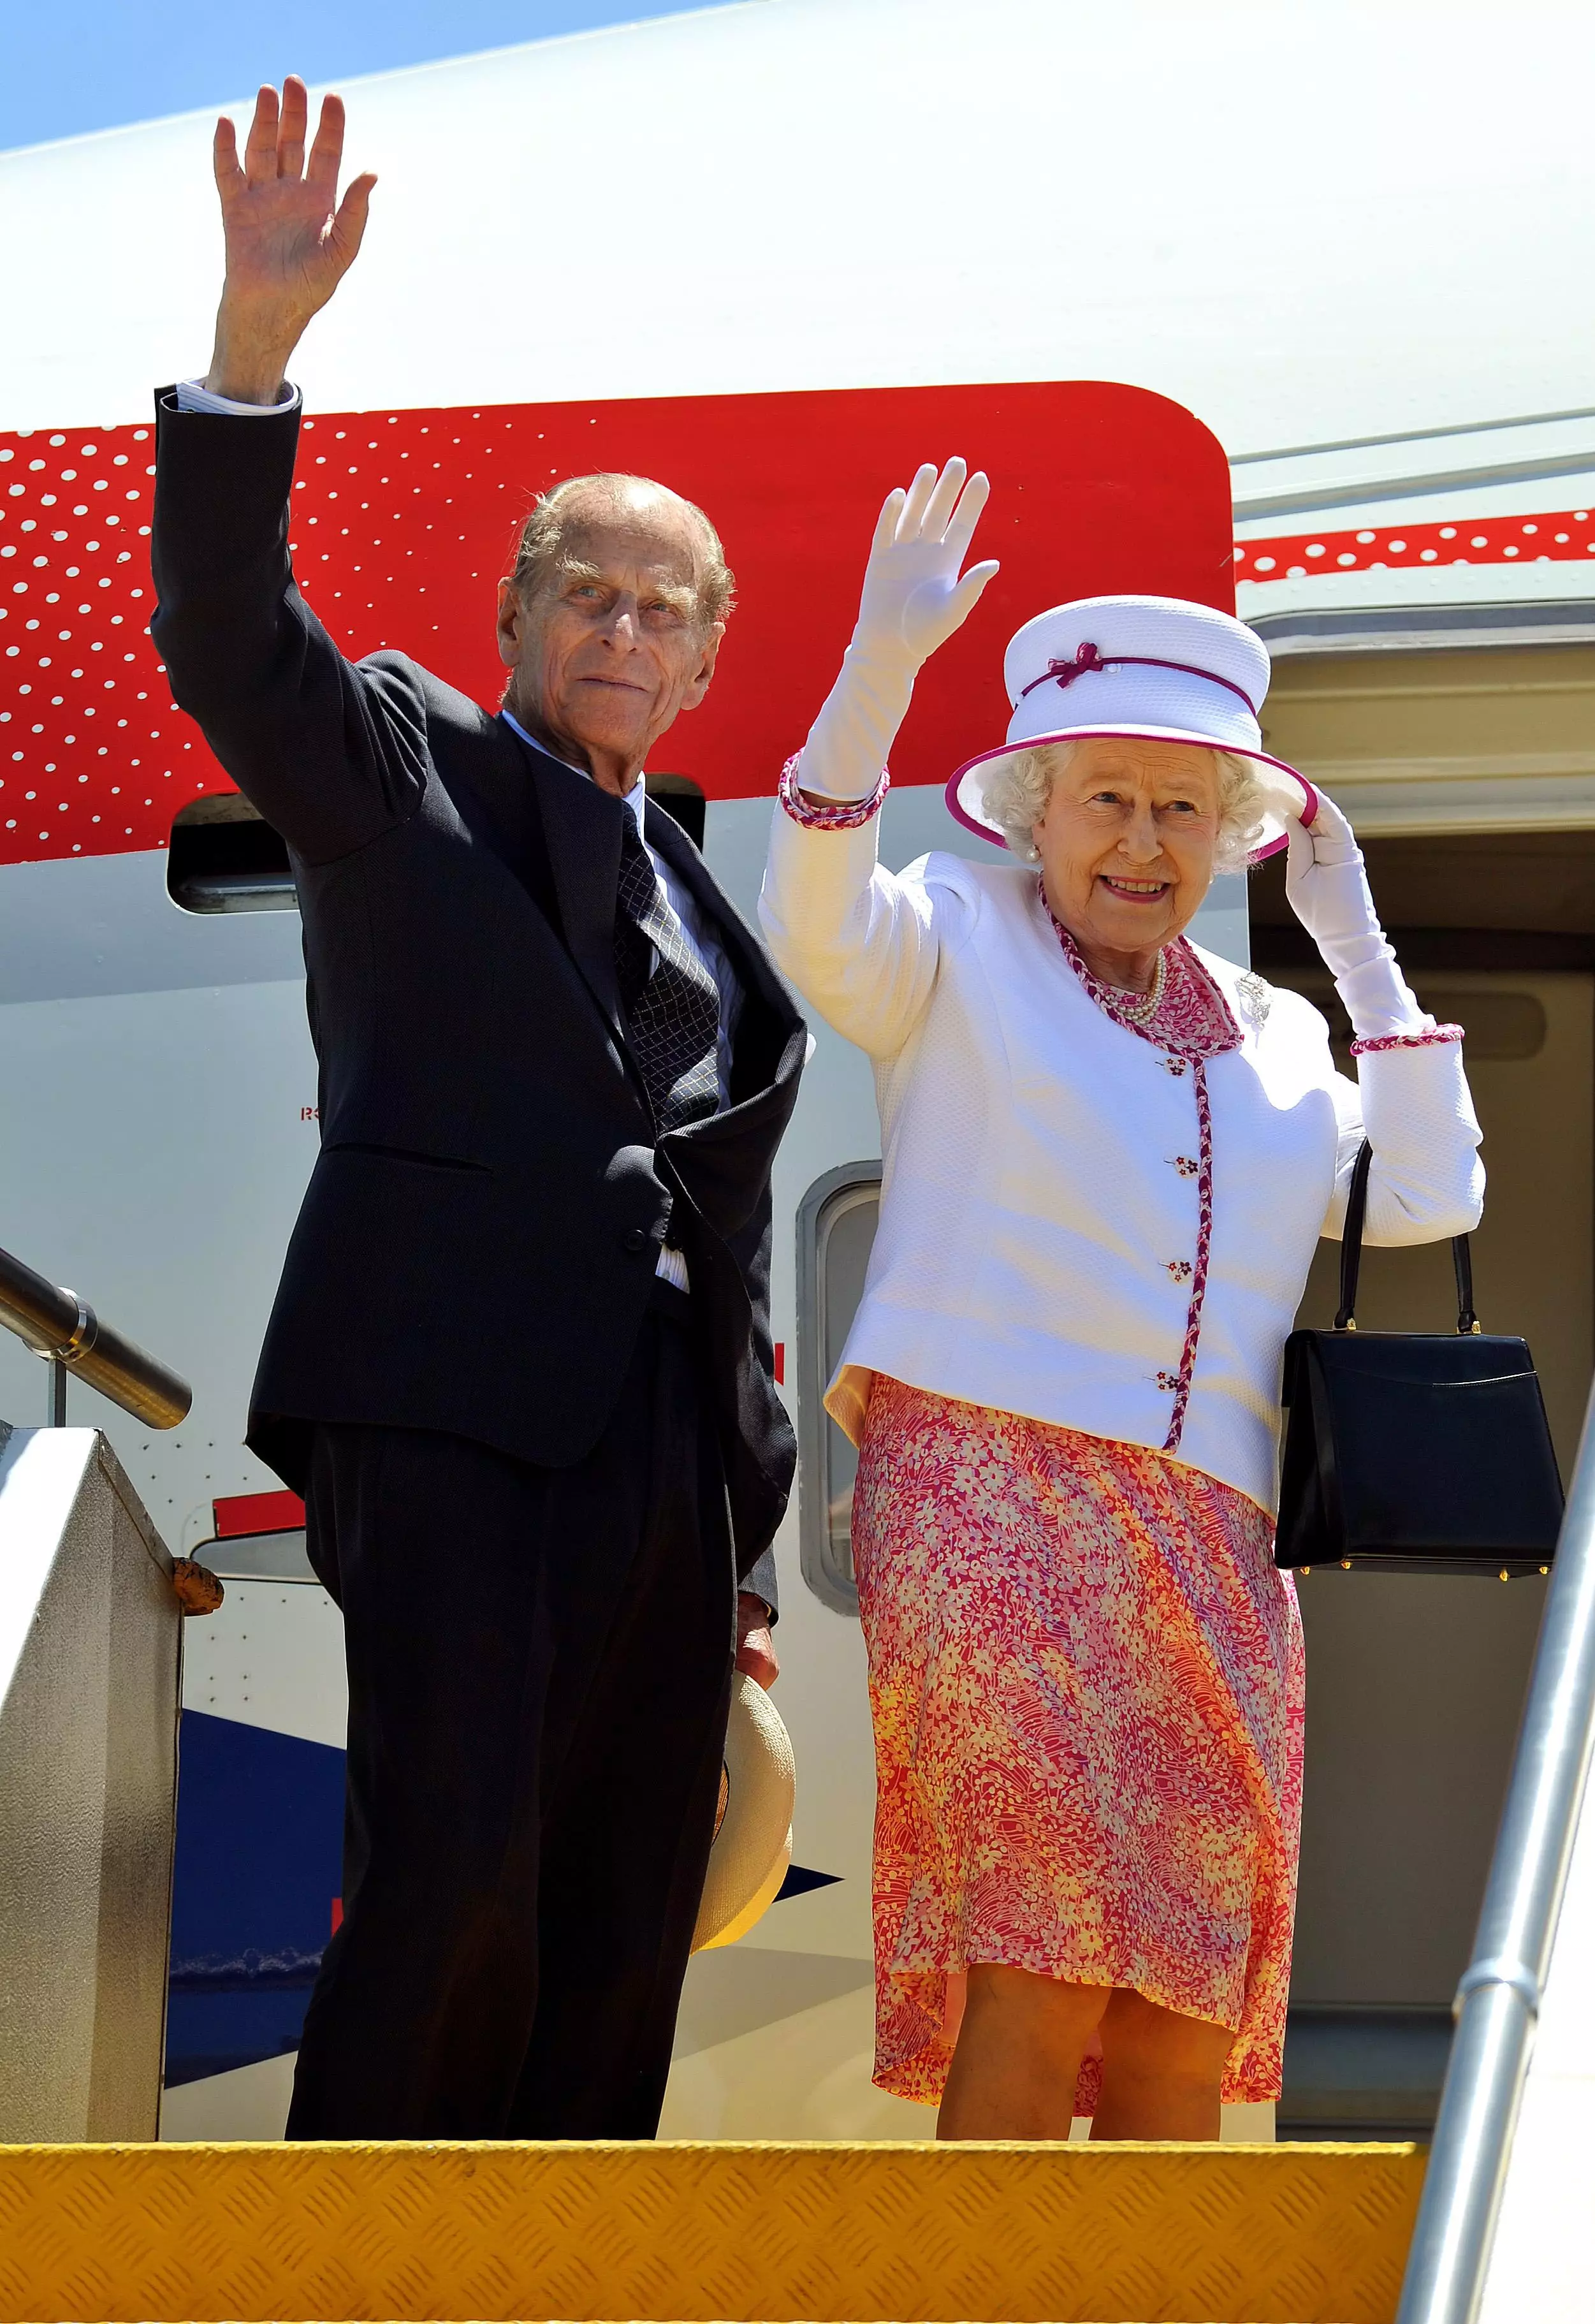 The Queen is currently hiring someone to be in charge of all of the royal family's travel.